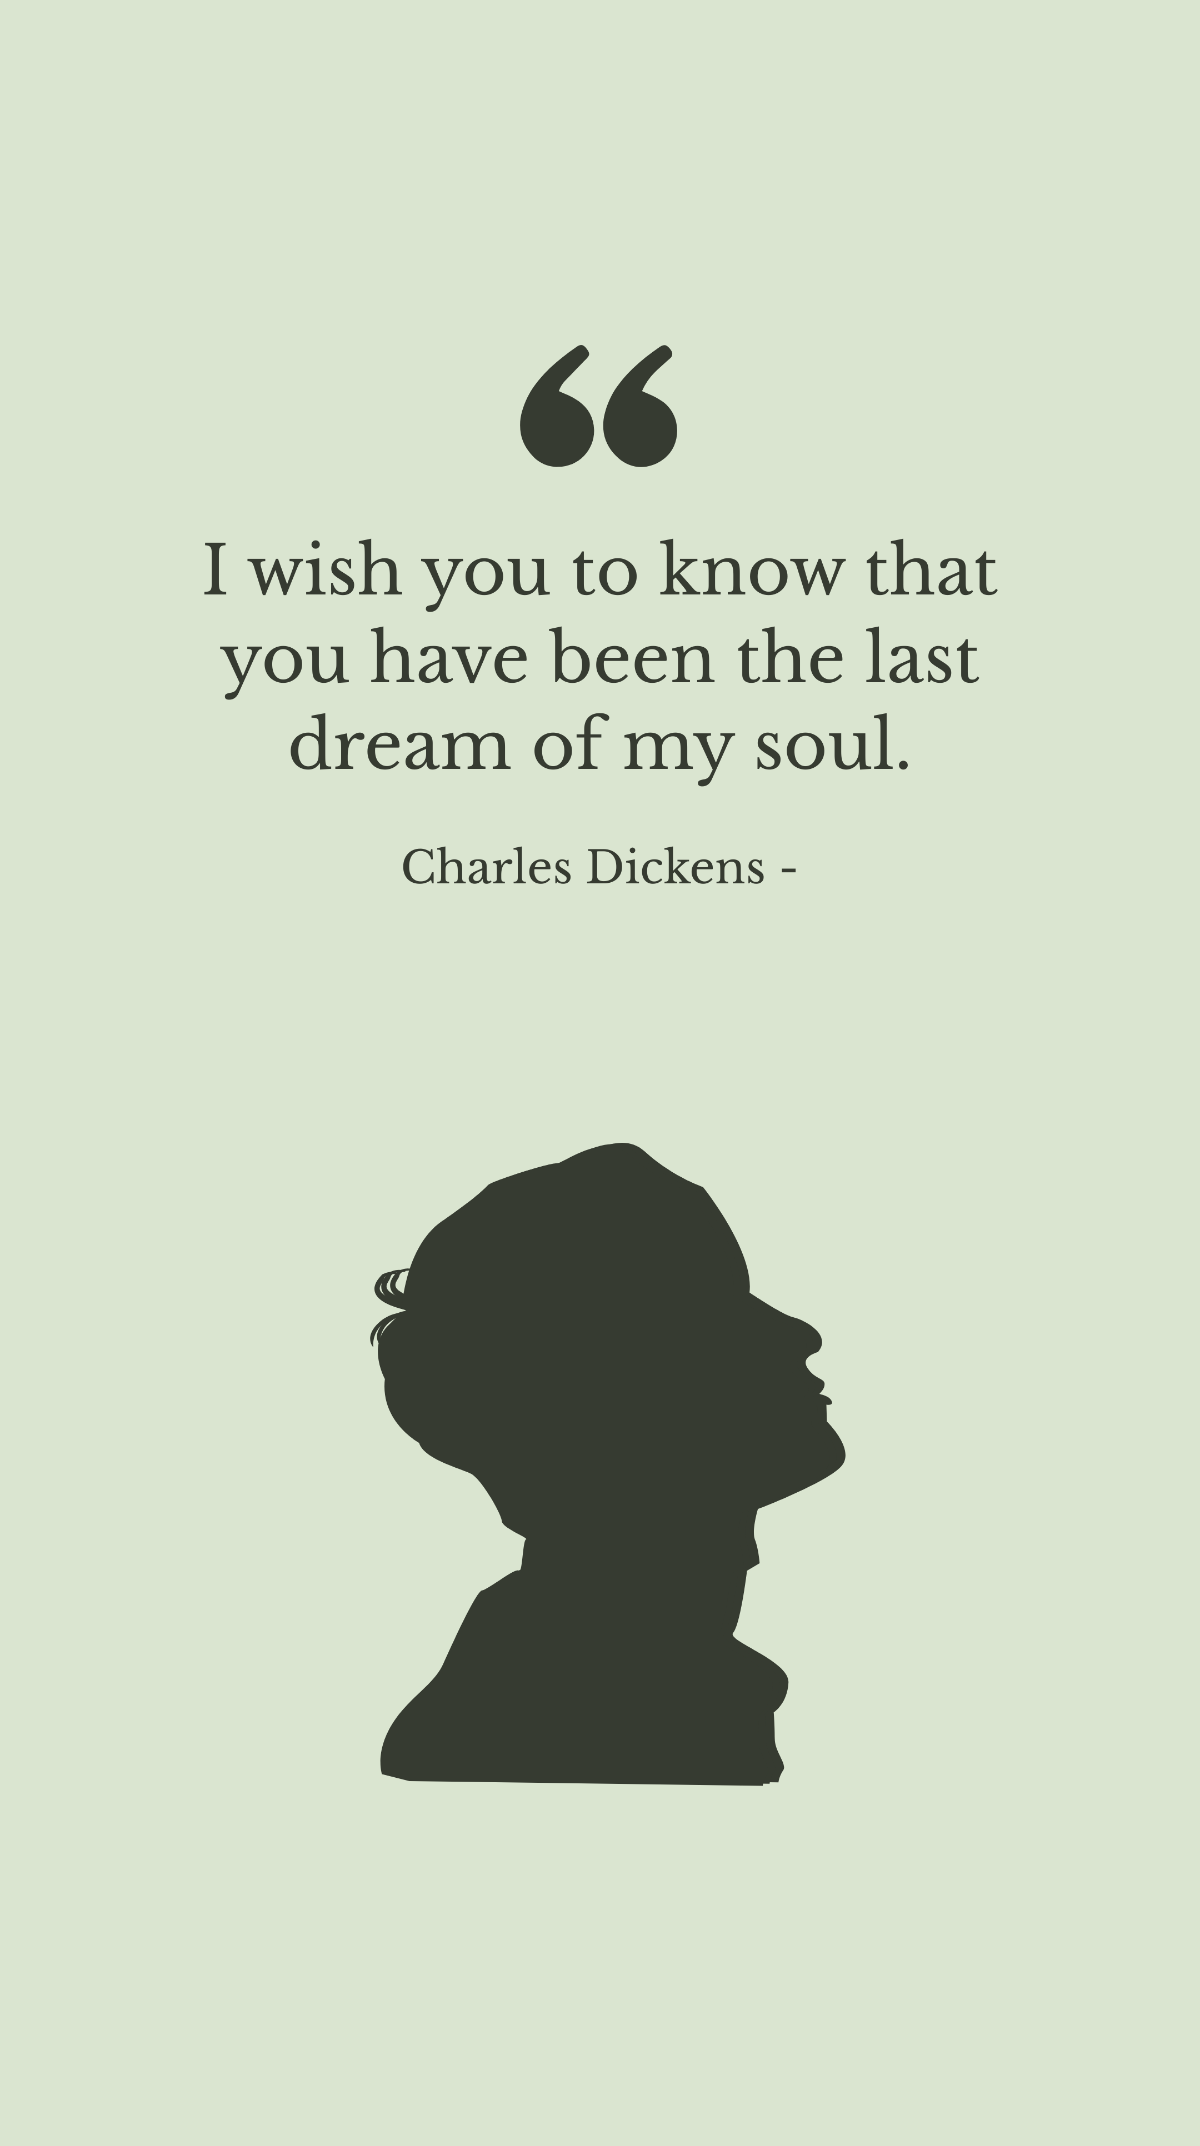 Charles Dickens - I wish you to know that you have been the last dream of my soul. Template